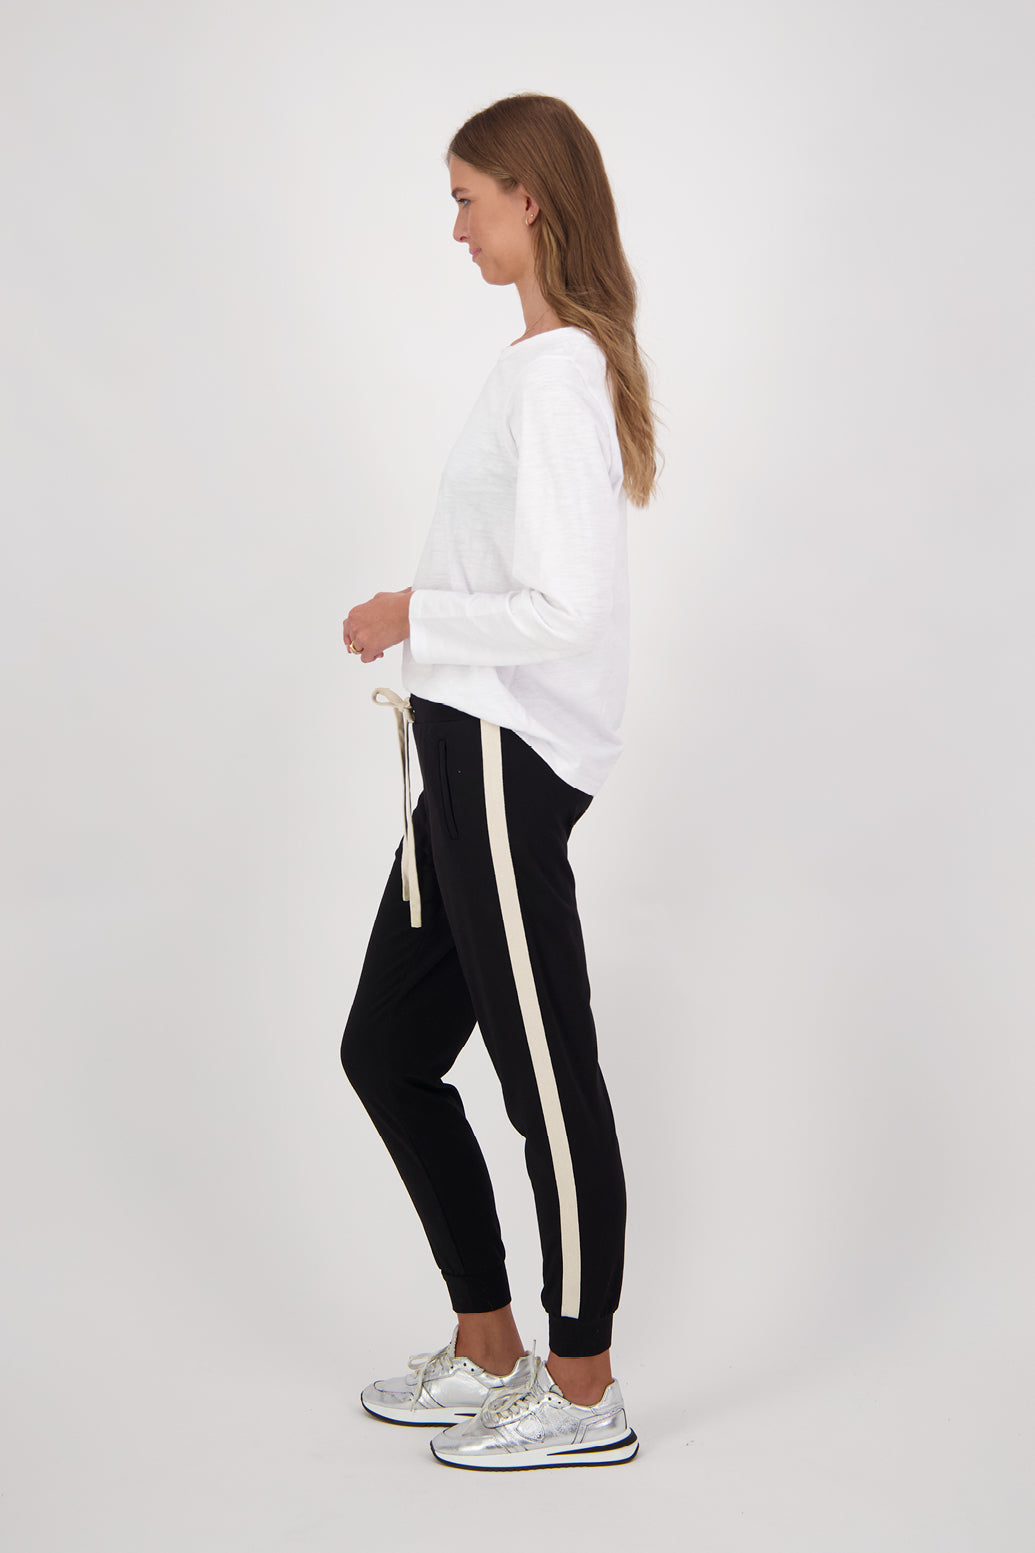 Claudia Black Pant with Side Stripe